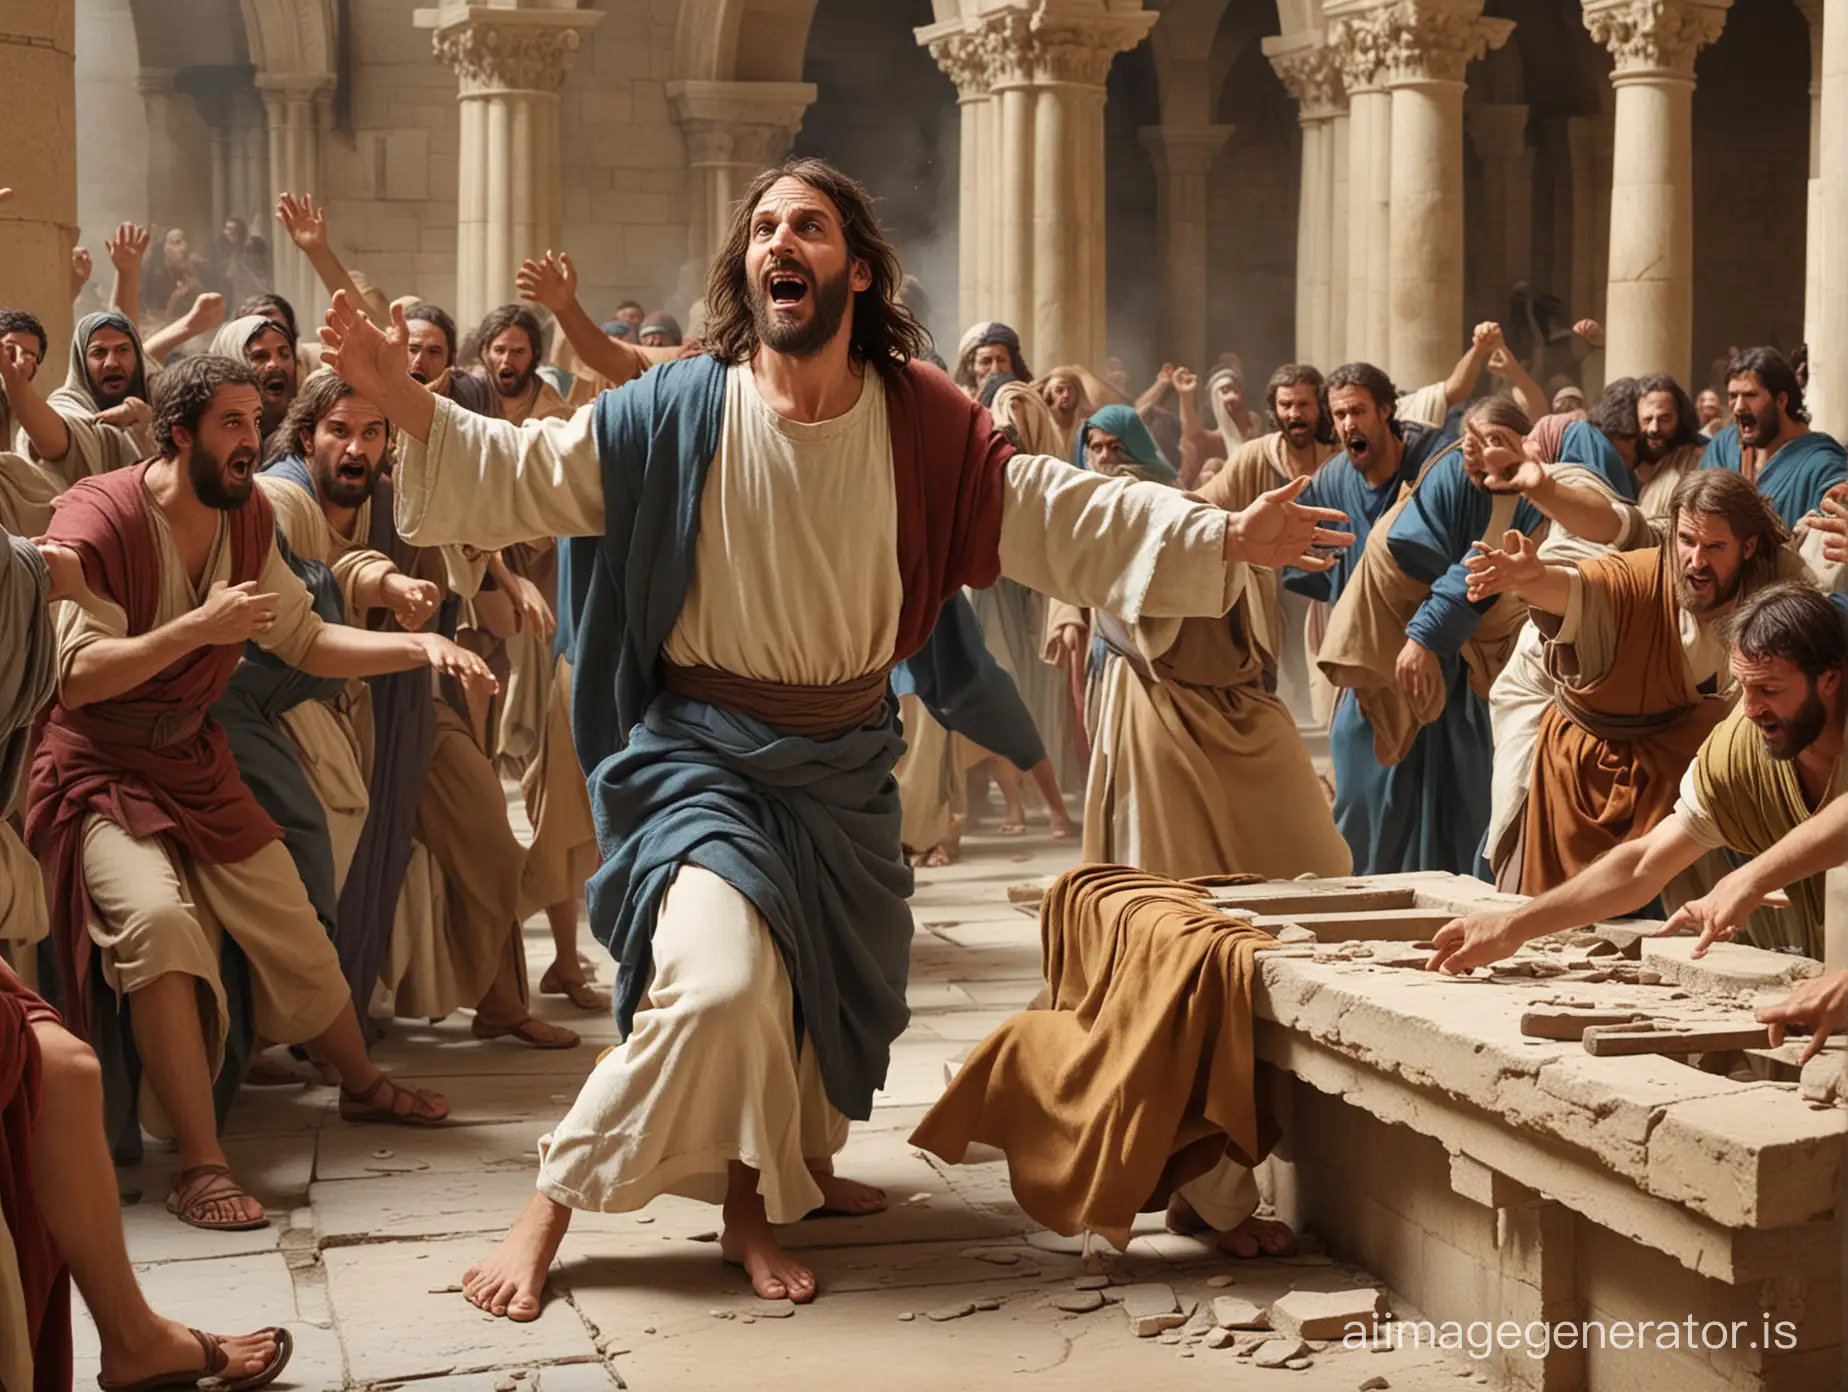 Jesus-Angered-by-Money-Changers-Temple-Chaos-Scene